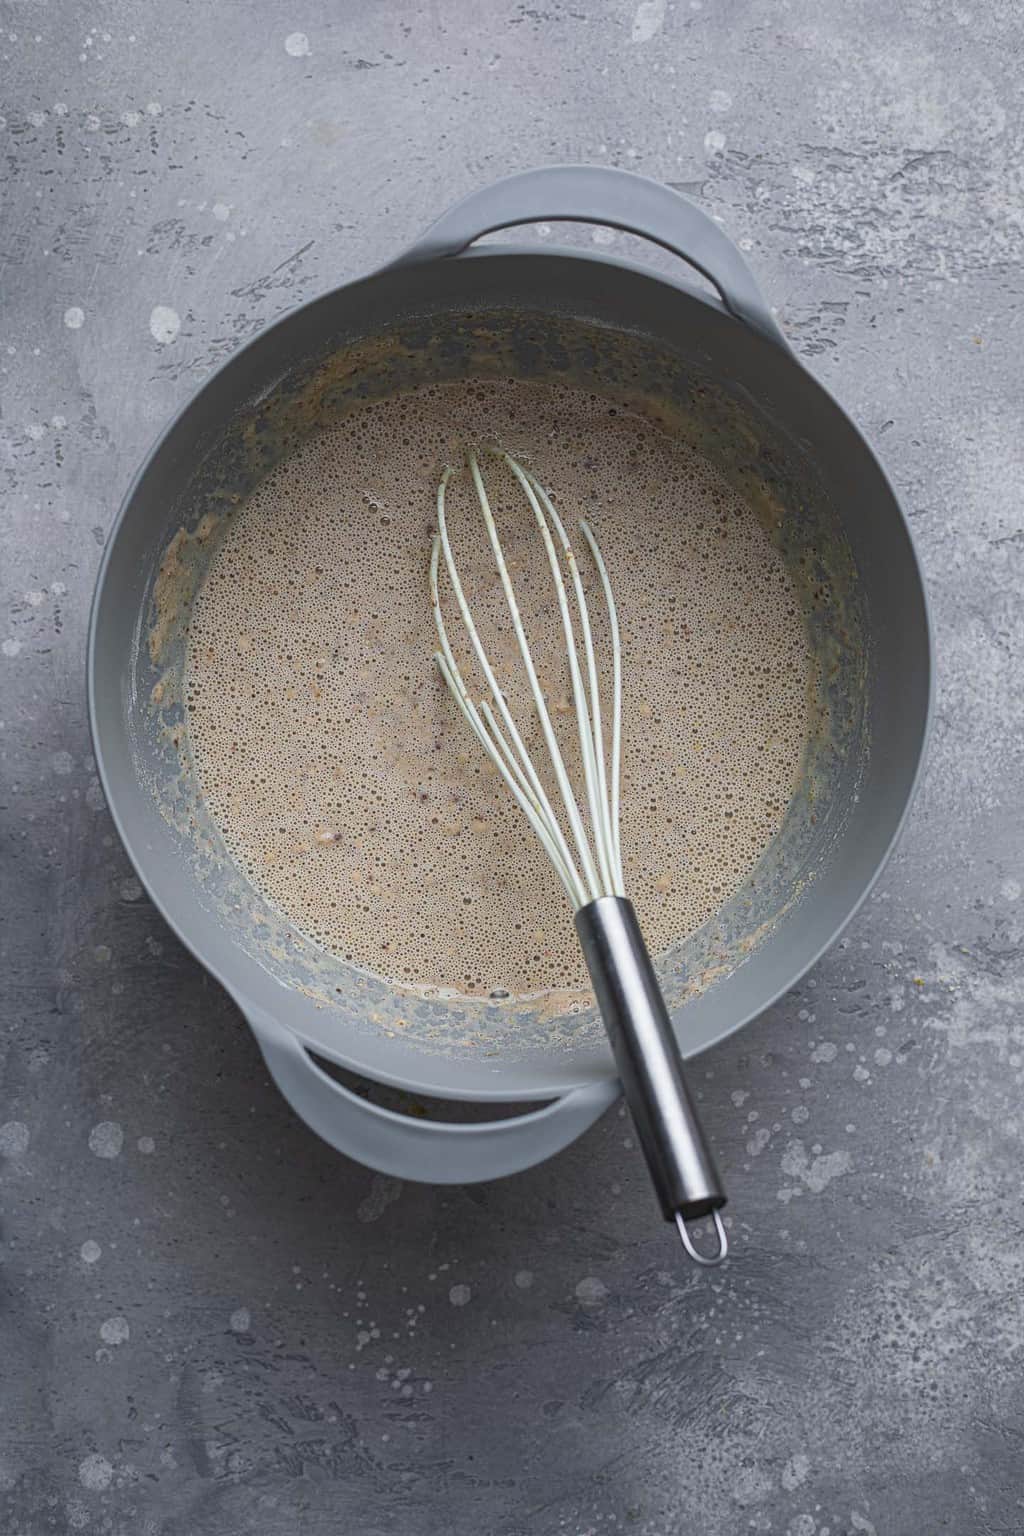 Buckwheat crepe batter in a mixing bowl